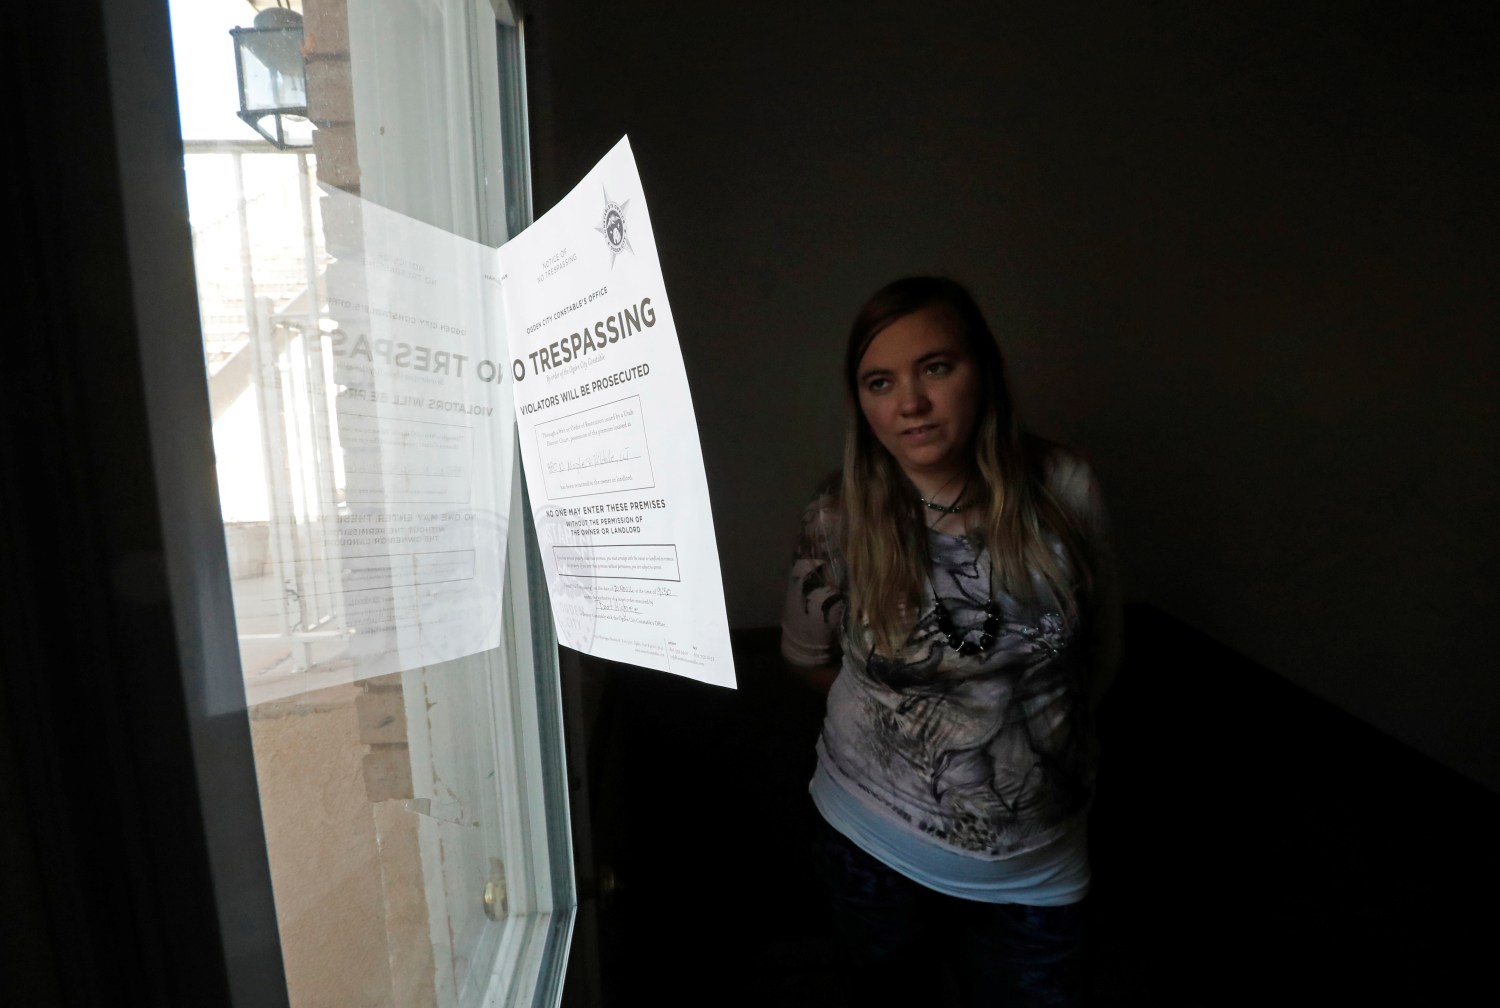 Briell Decker, the 65th wife of jailed Fundamentalist Church of Jesus Christ of Latter-Day Saints (FLDS Church) polygamist prophet leader Warren Jeffs, looks at an eviction notice on the window at his compound, where he lived for several years, in Hildale, Utah, U.S., May 3, 2017. She is in the process of purchasing the compound. Picture taken May 3, 2017.  REUTERS/George Frey